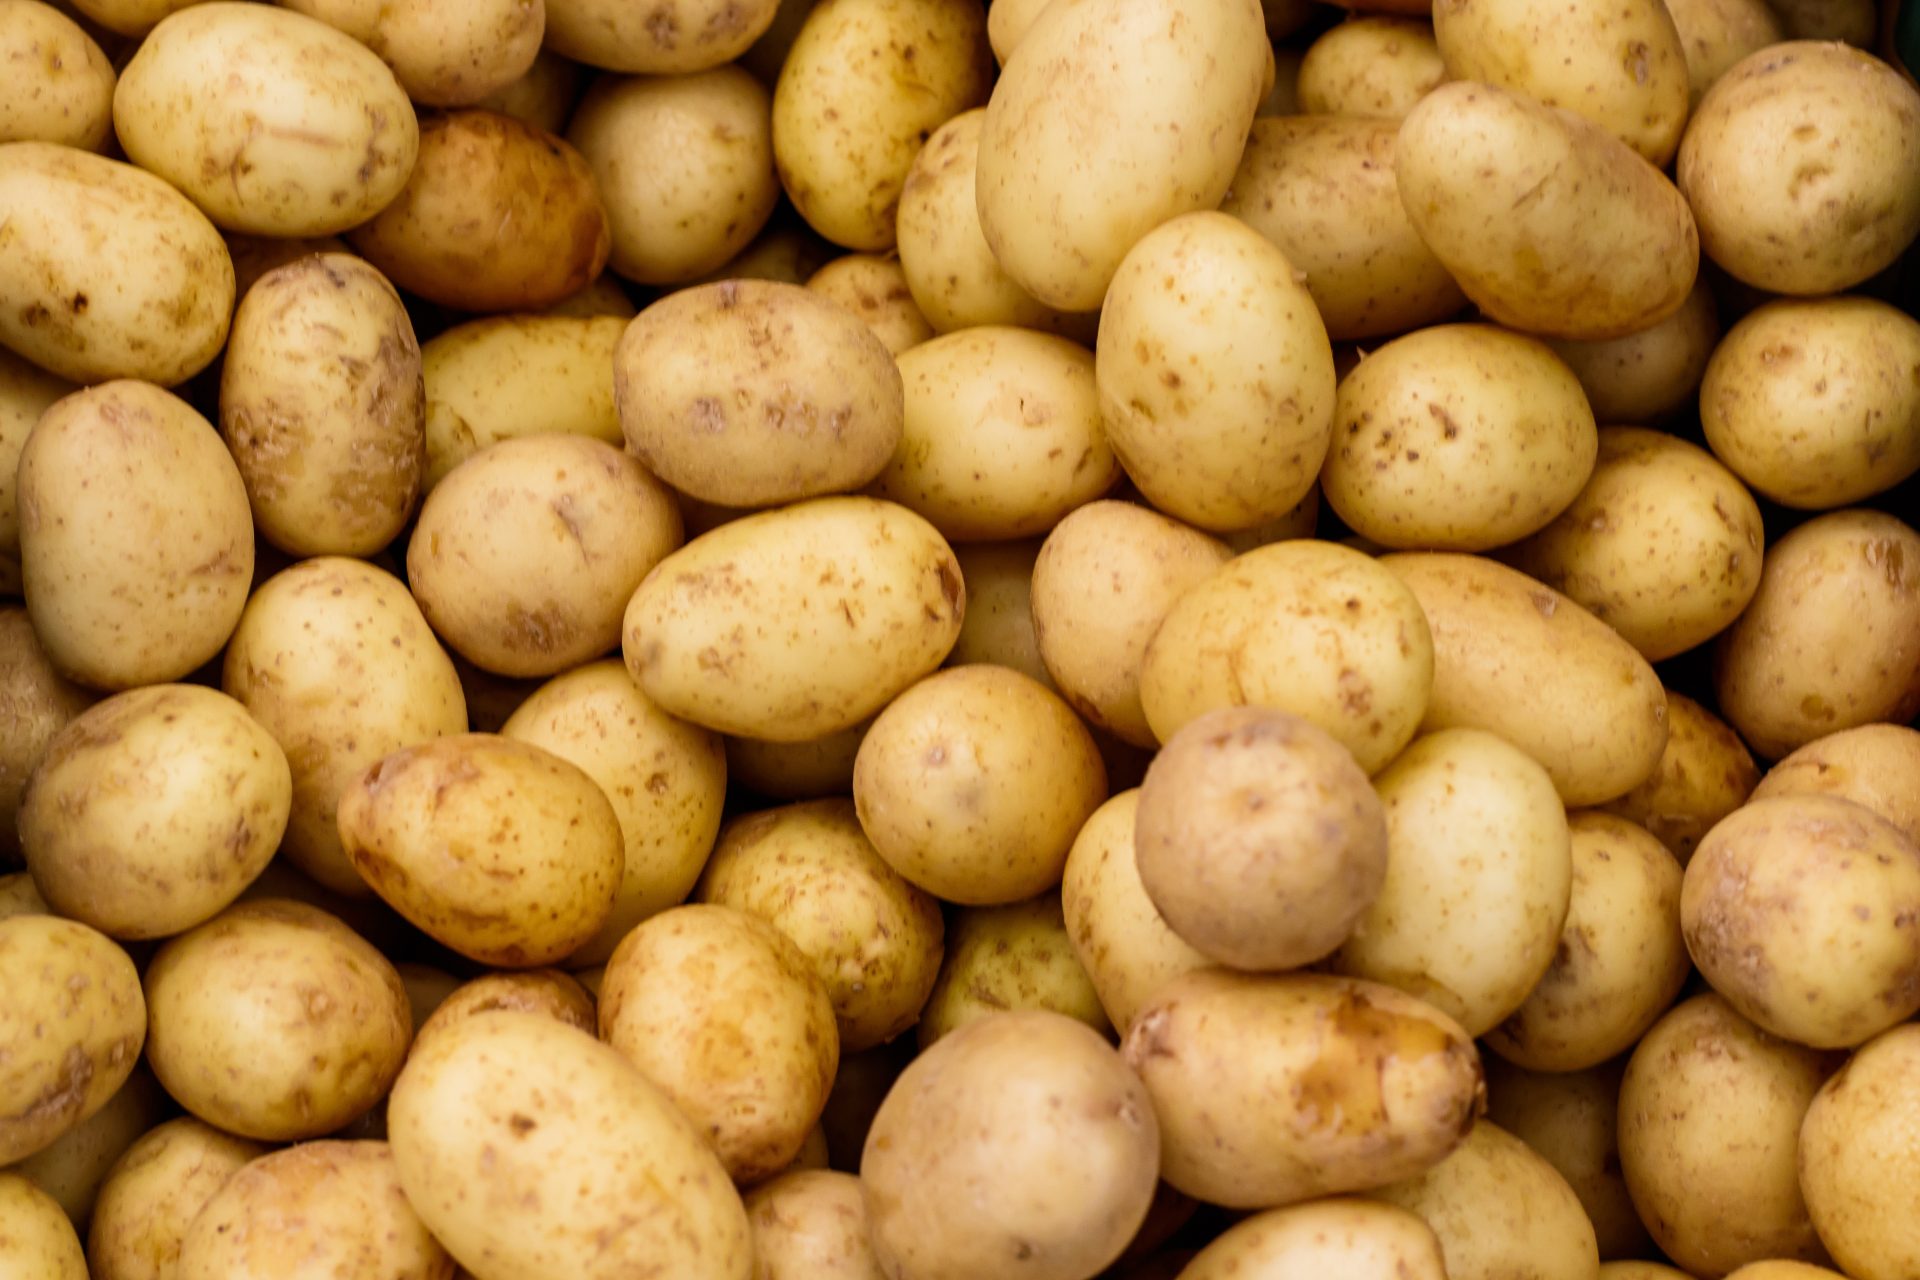 Editorial: On dietary, health issues honesty is the best policy: Potatoes are still vegetables